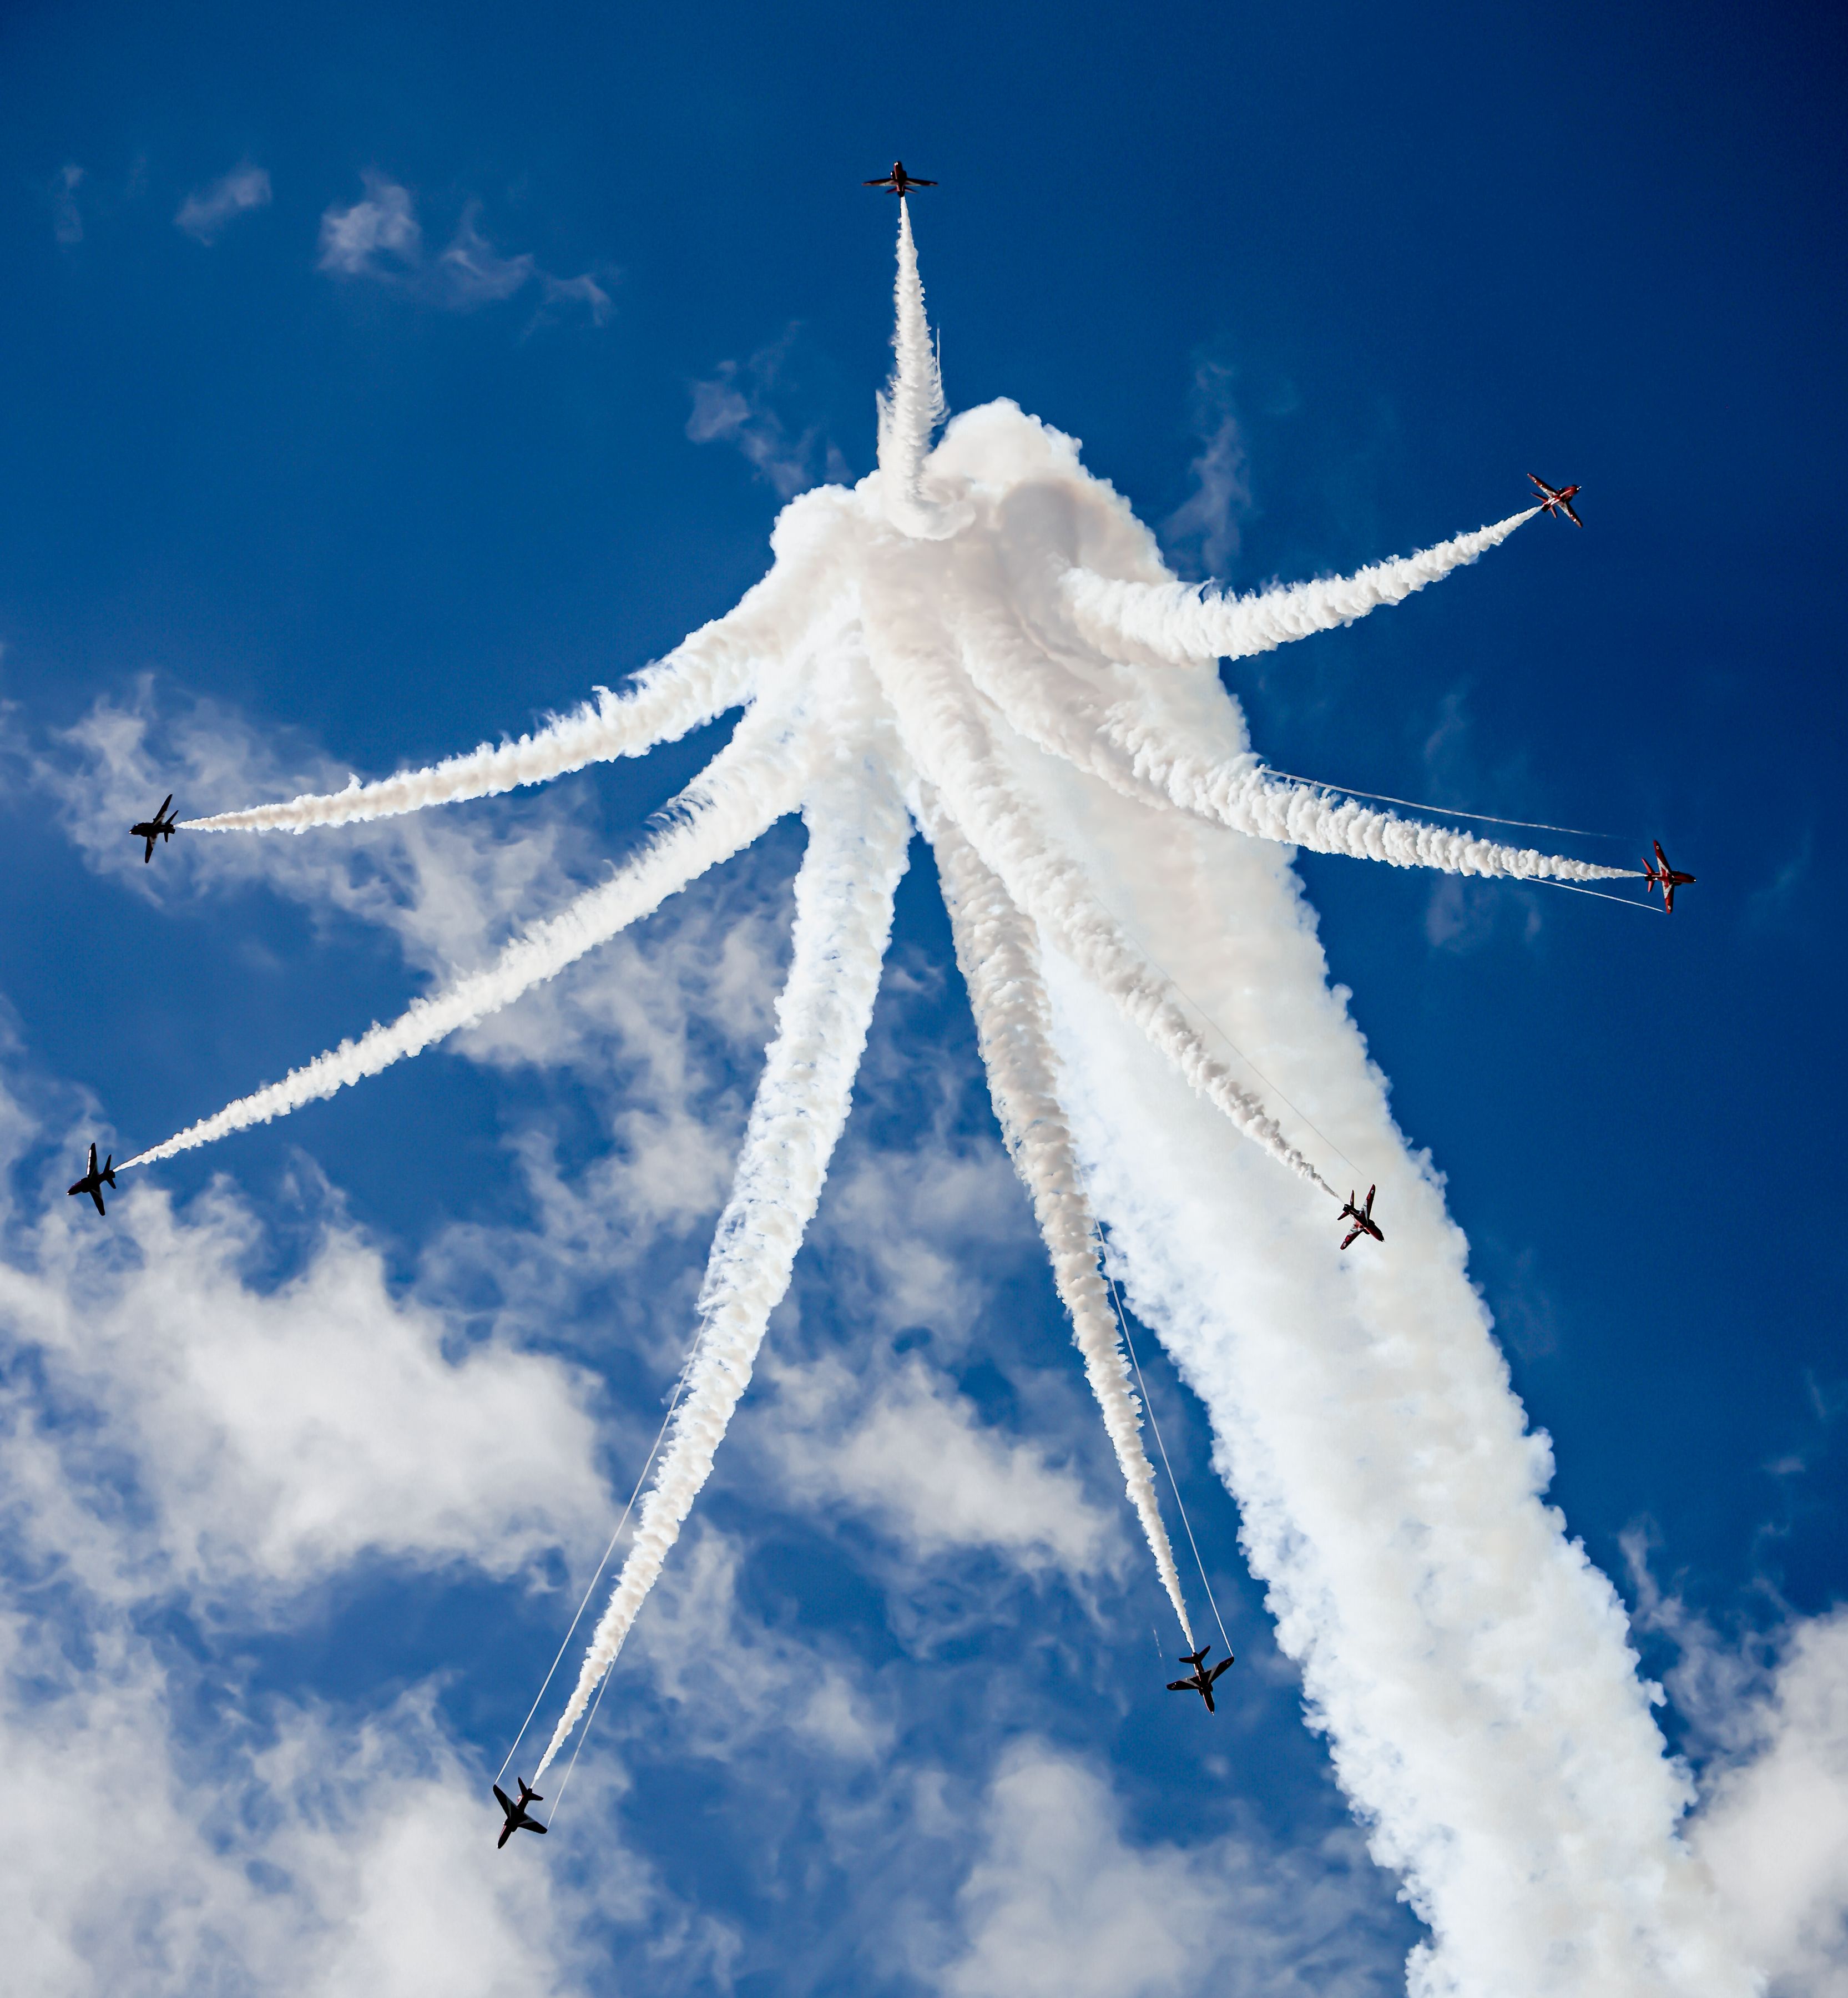 8 Rad Arrows aircraft splitting off from a central point, creating an impressive smoke trail